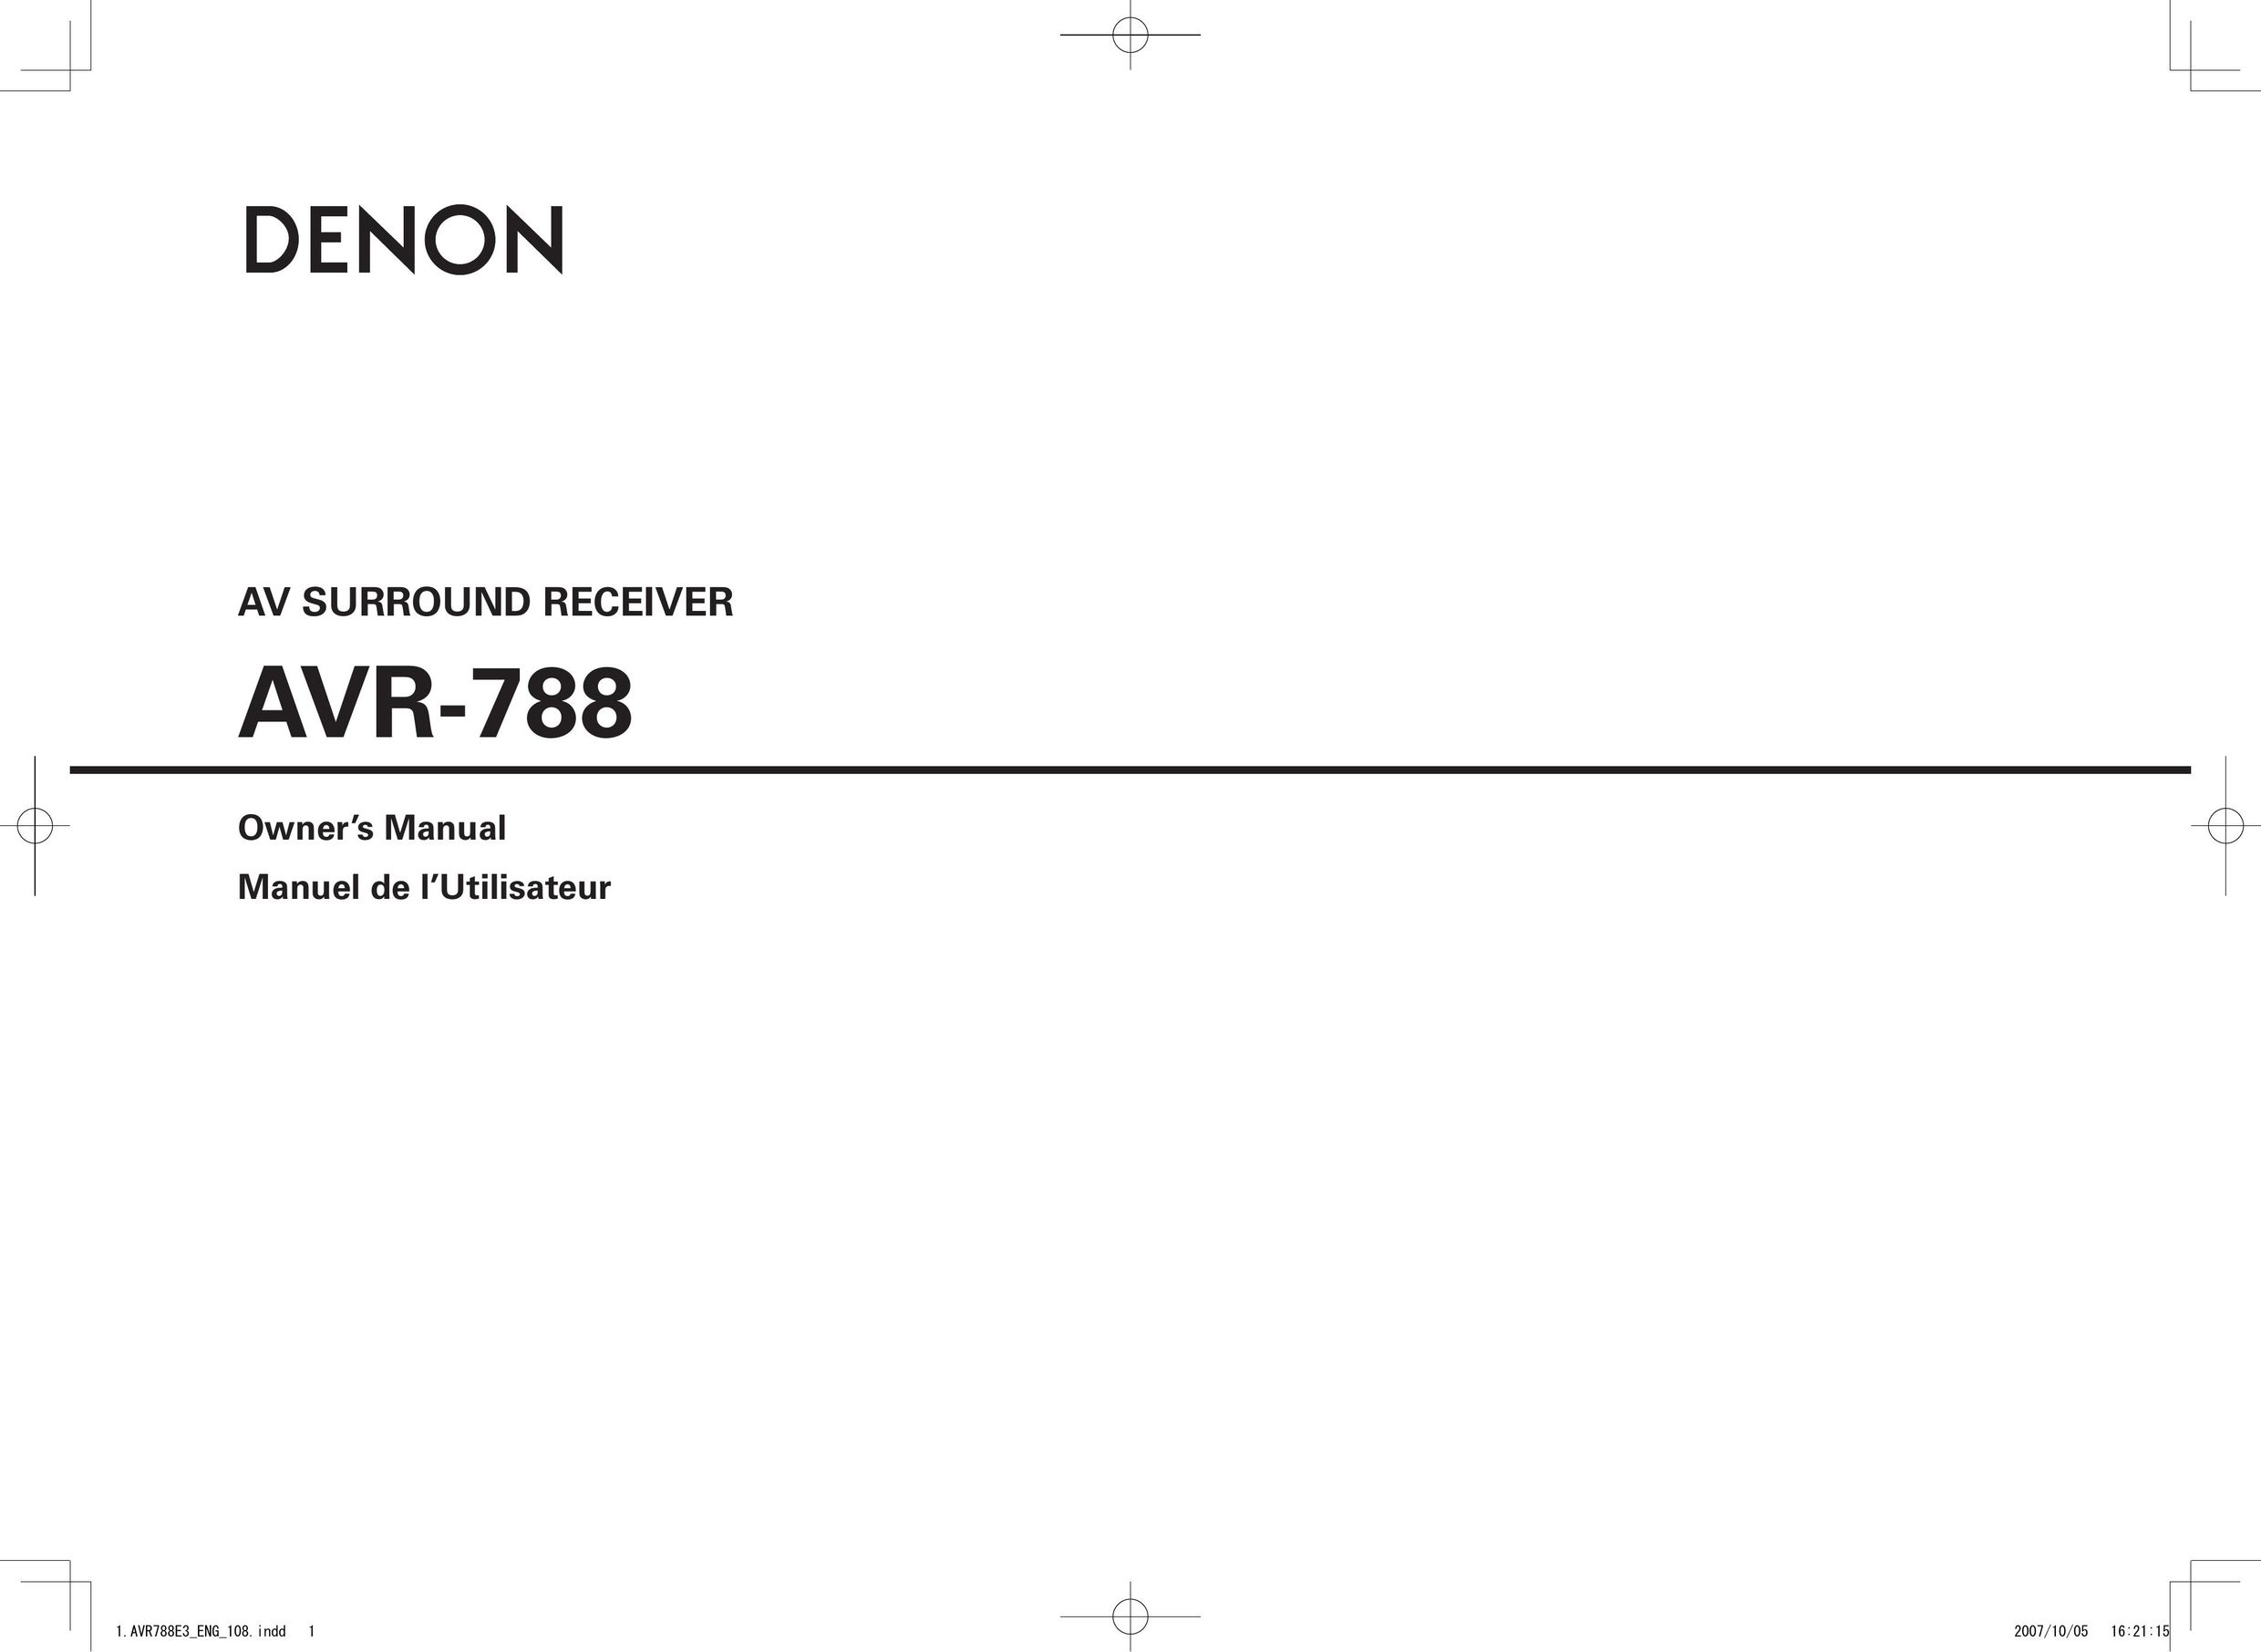 Denon AVR-788 Home Theater System User Manual